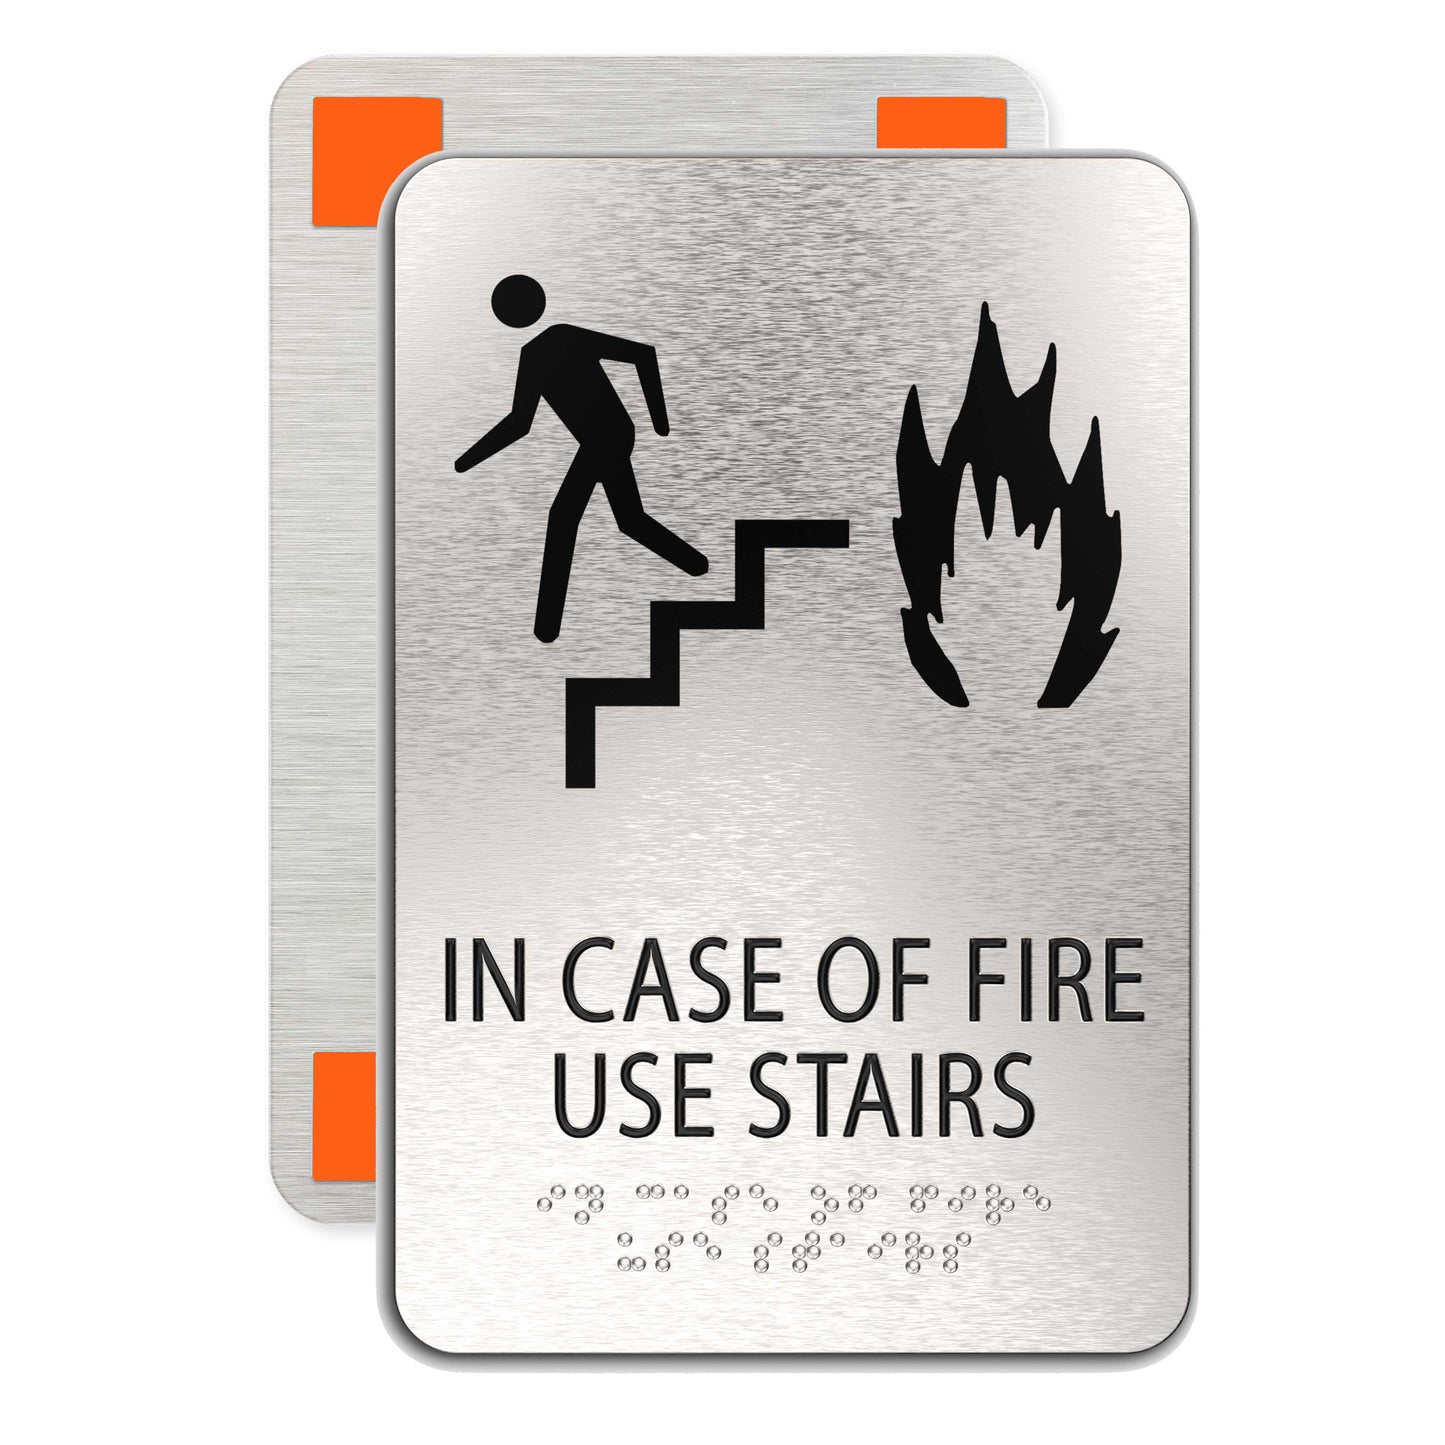 IN CASE OF FIRE Use Stairs sign , ADA Compliant, Man, Fire & Stair Symbols, Brushed Silver, Raised Black Text, Non-Tactile Pictograms, Grade 2 Braille, 6"x9"